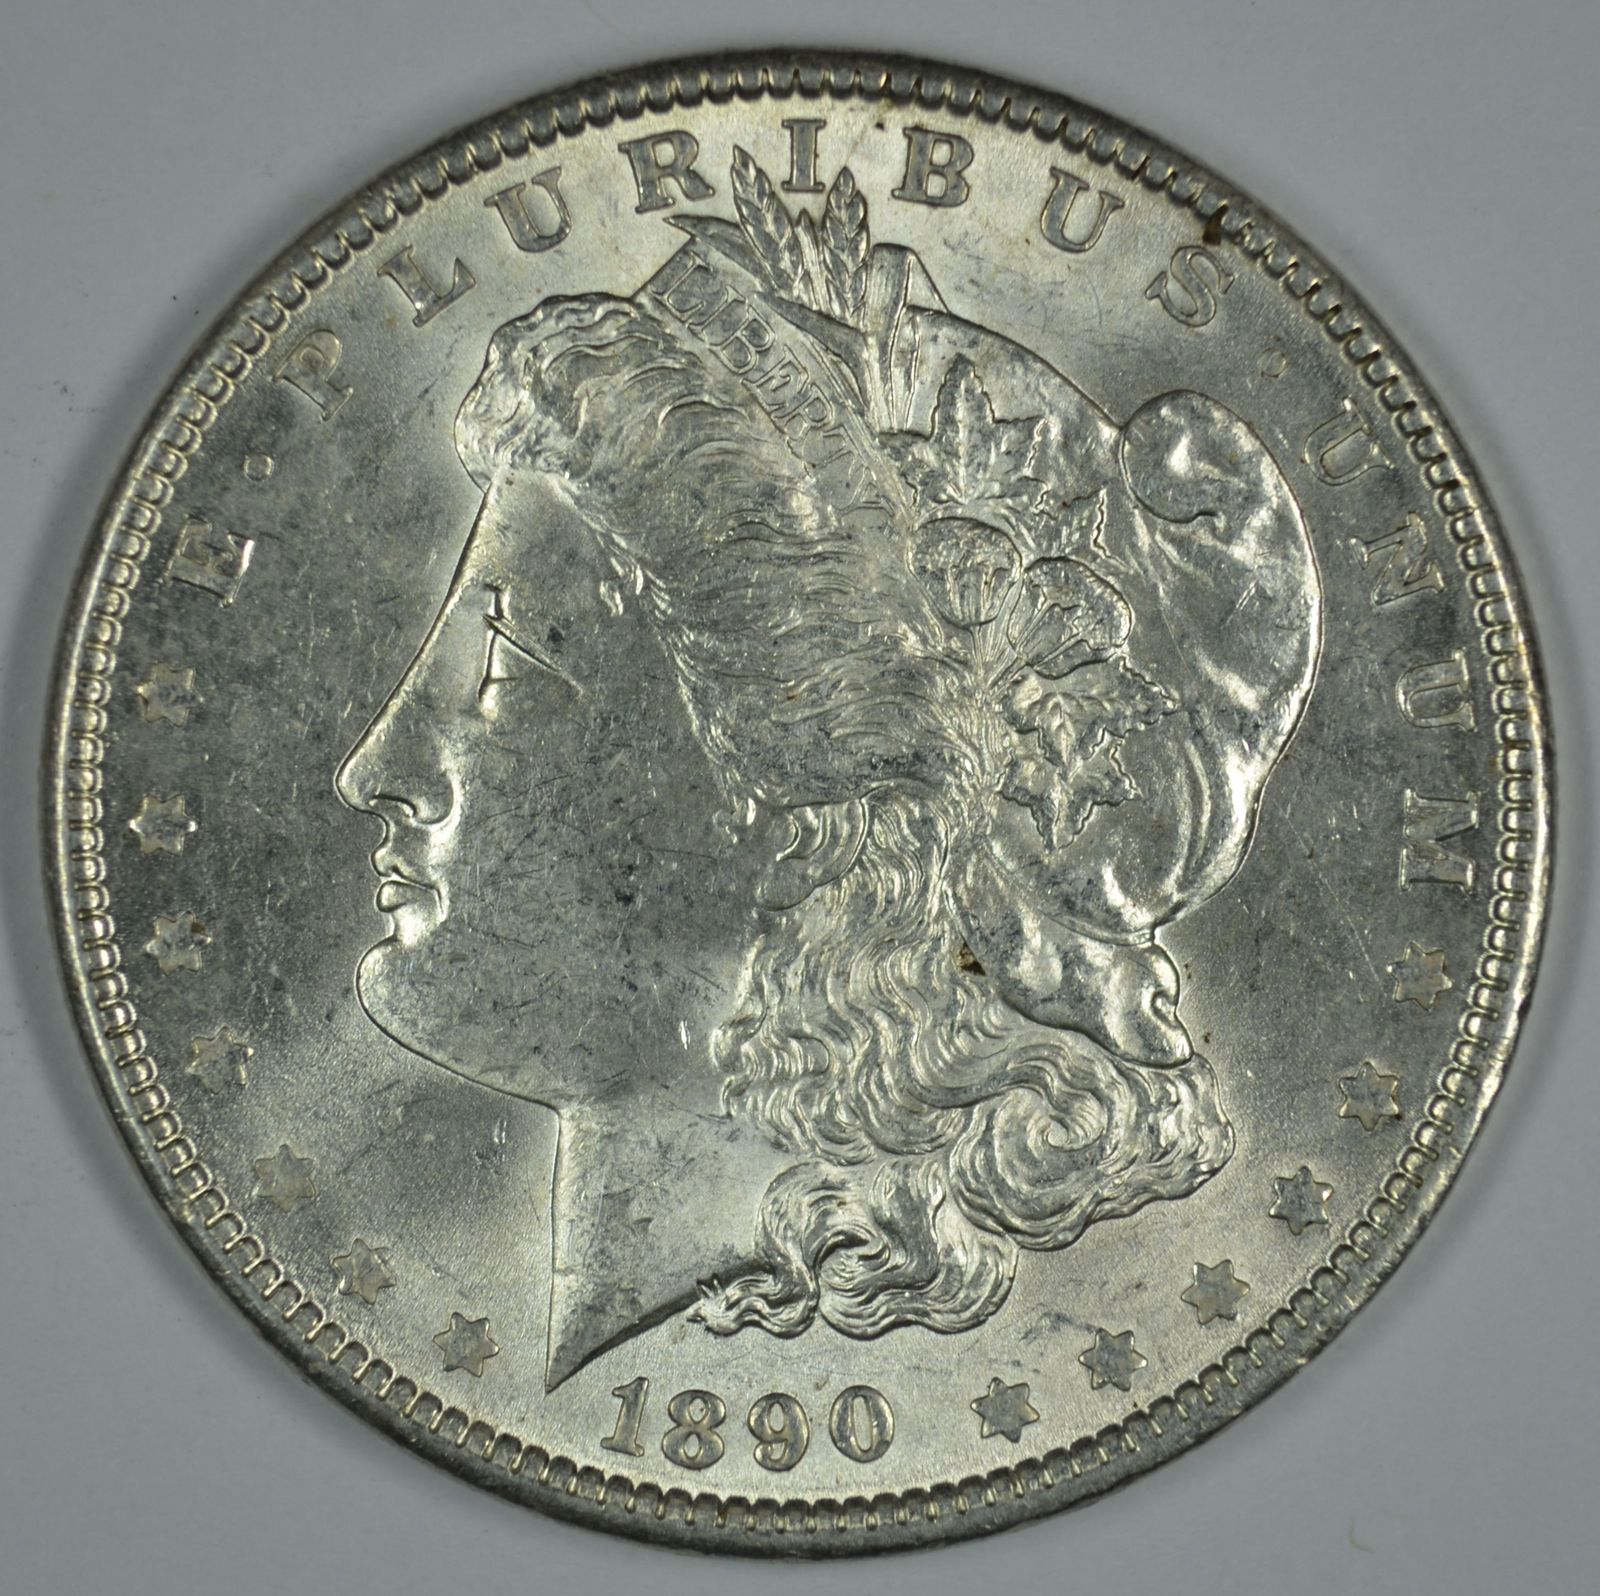 Primary image for 1890 P Morgan circulated silver dollar AU details